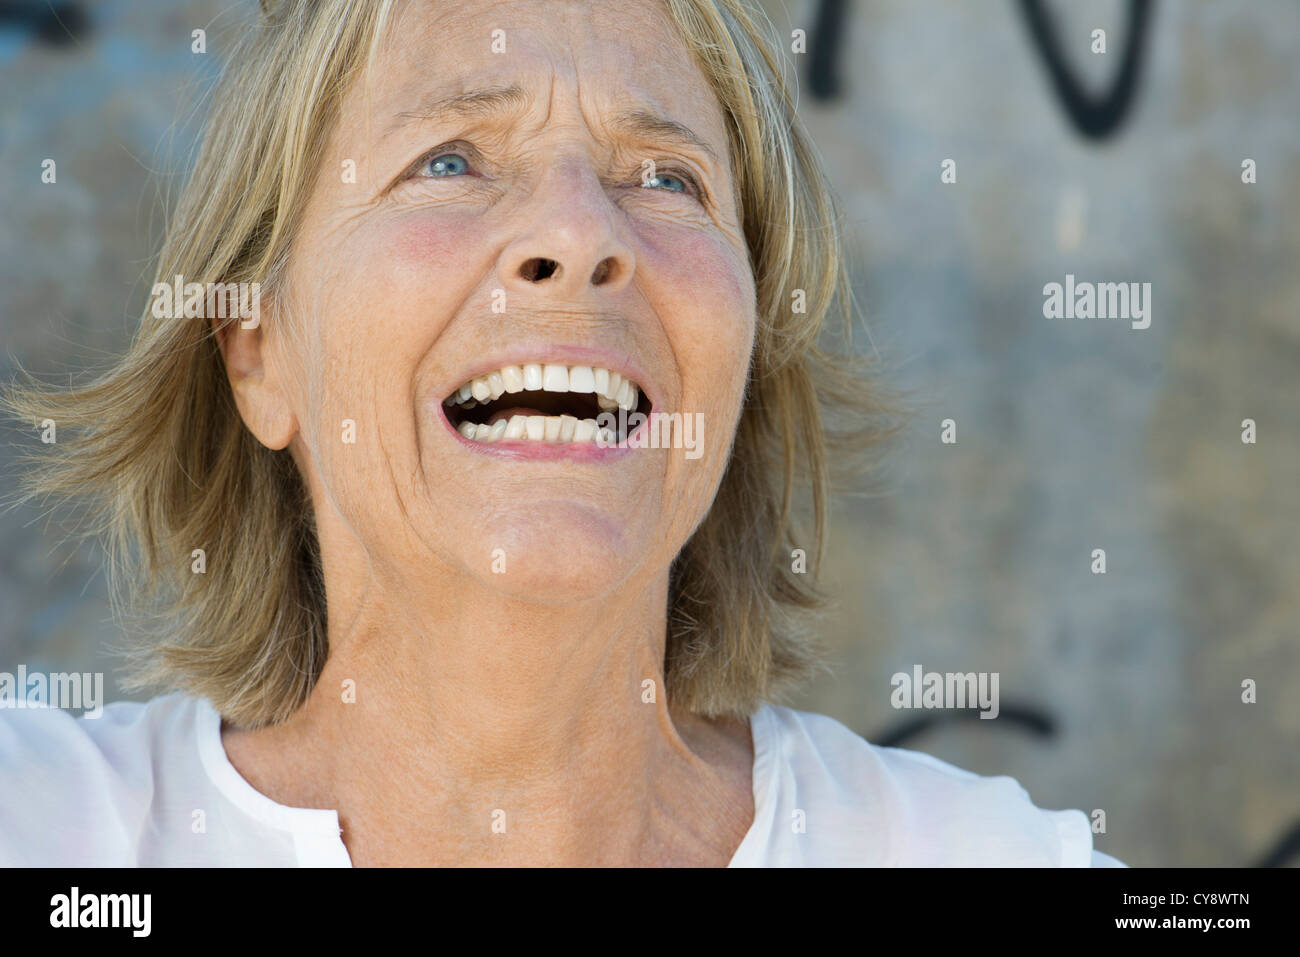 Anguished Face High Resolution Stock Photography And Images Alamy